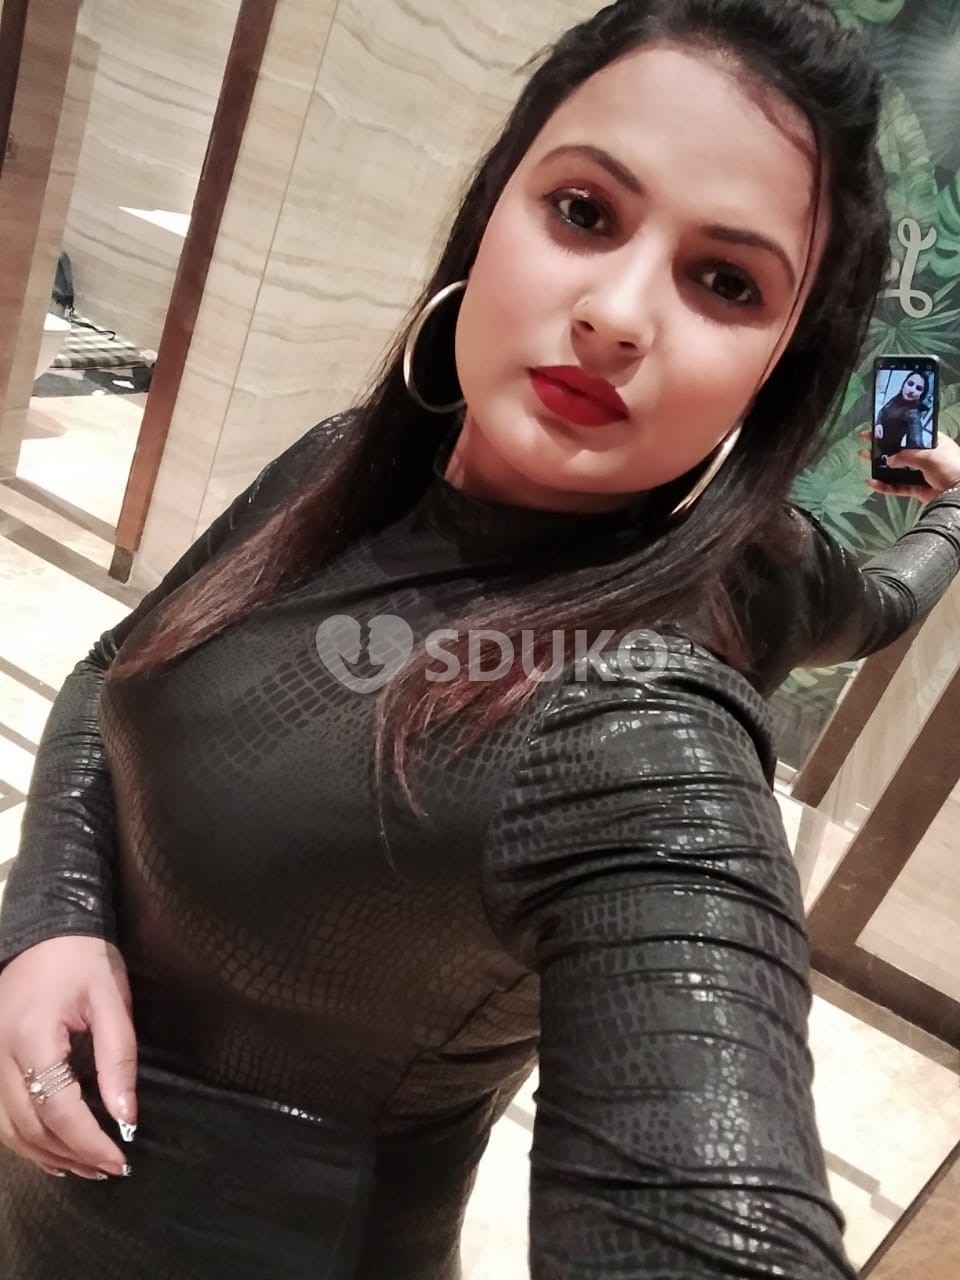 Colva beach 🥰✅❣️. 100% SAFE AND SECURE TODAY LOW PRICE UNLIMITED ENJOY HOT COLLEGE GIRL HOUSEWIFE AUNTIES AVAIL